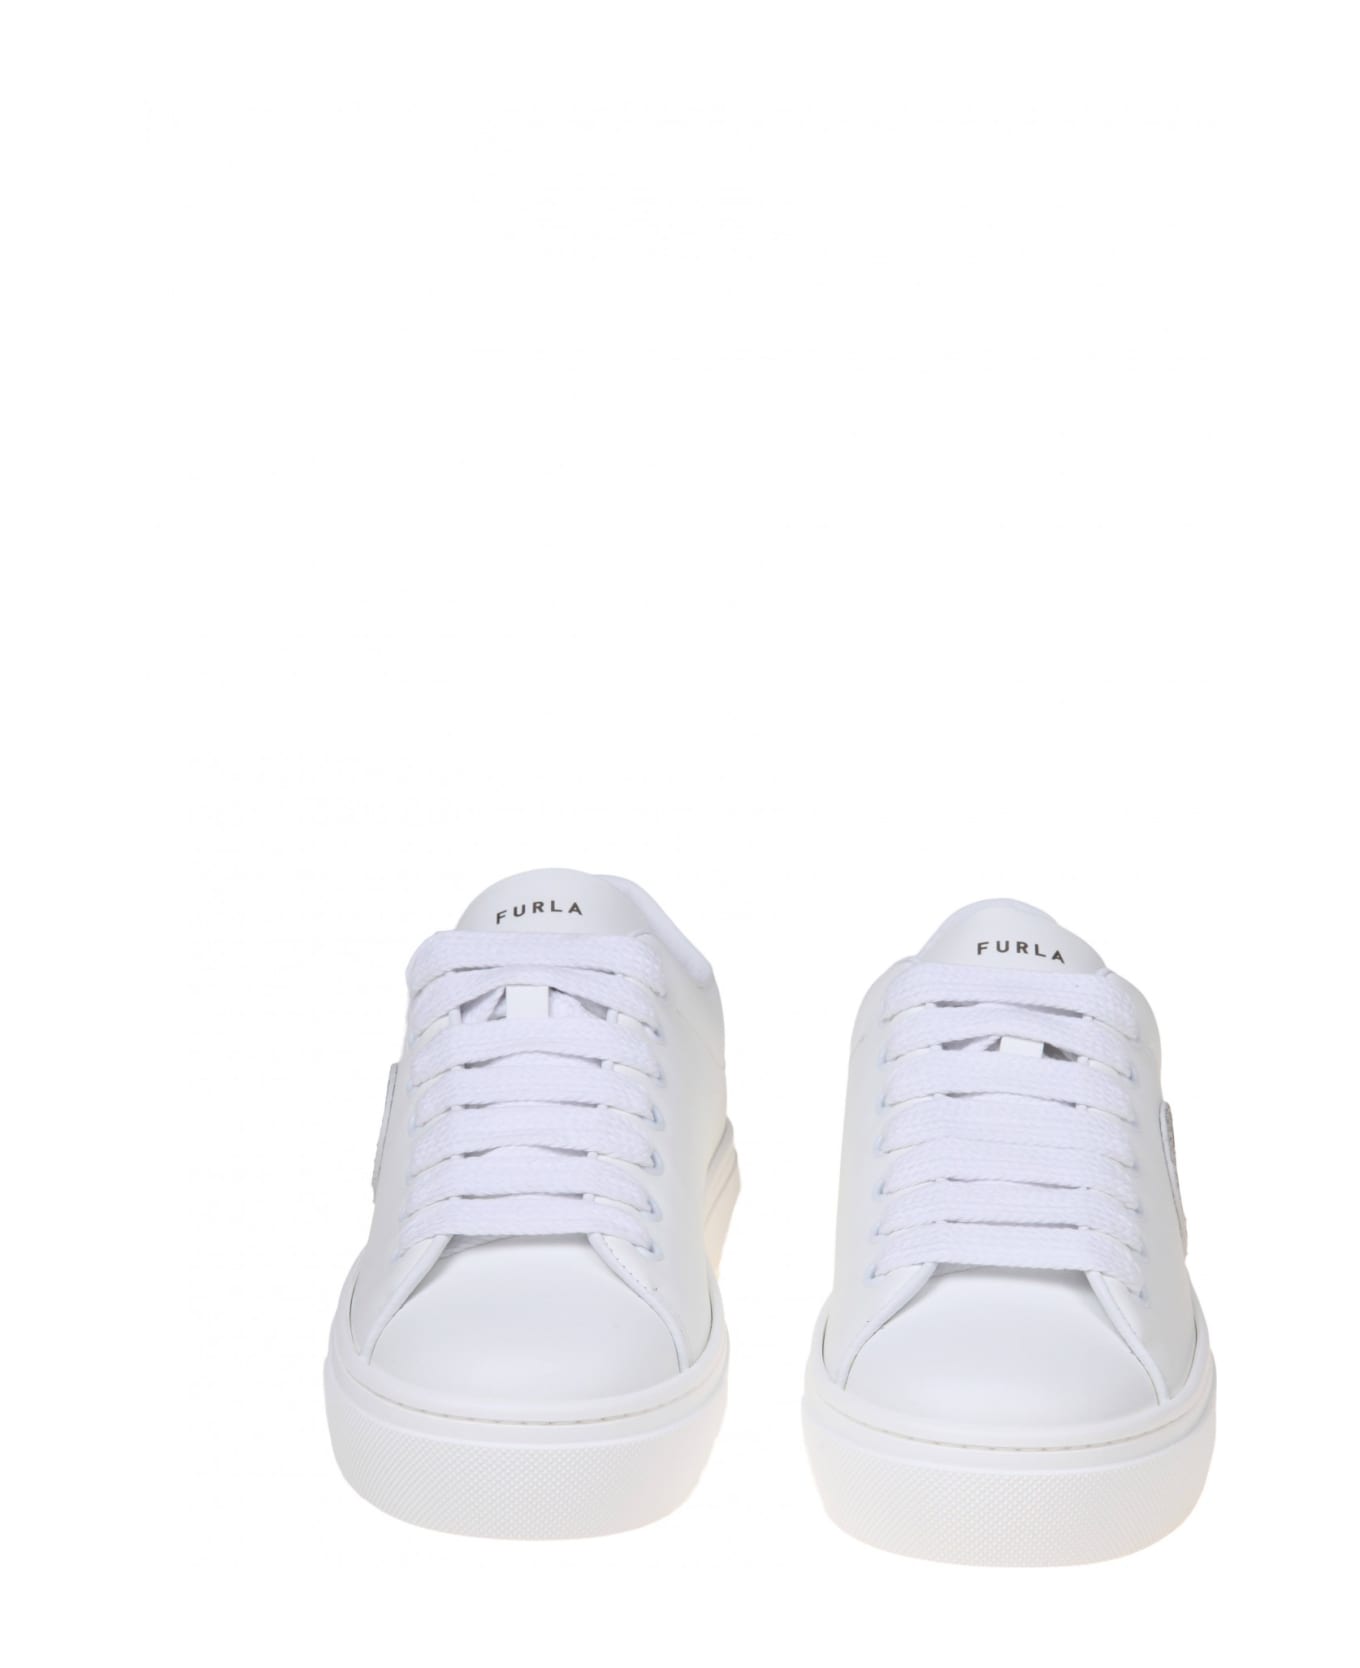 Furla Joy Lace Up Sneakers In White Leather - Yellow Cream